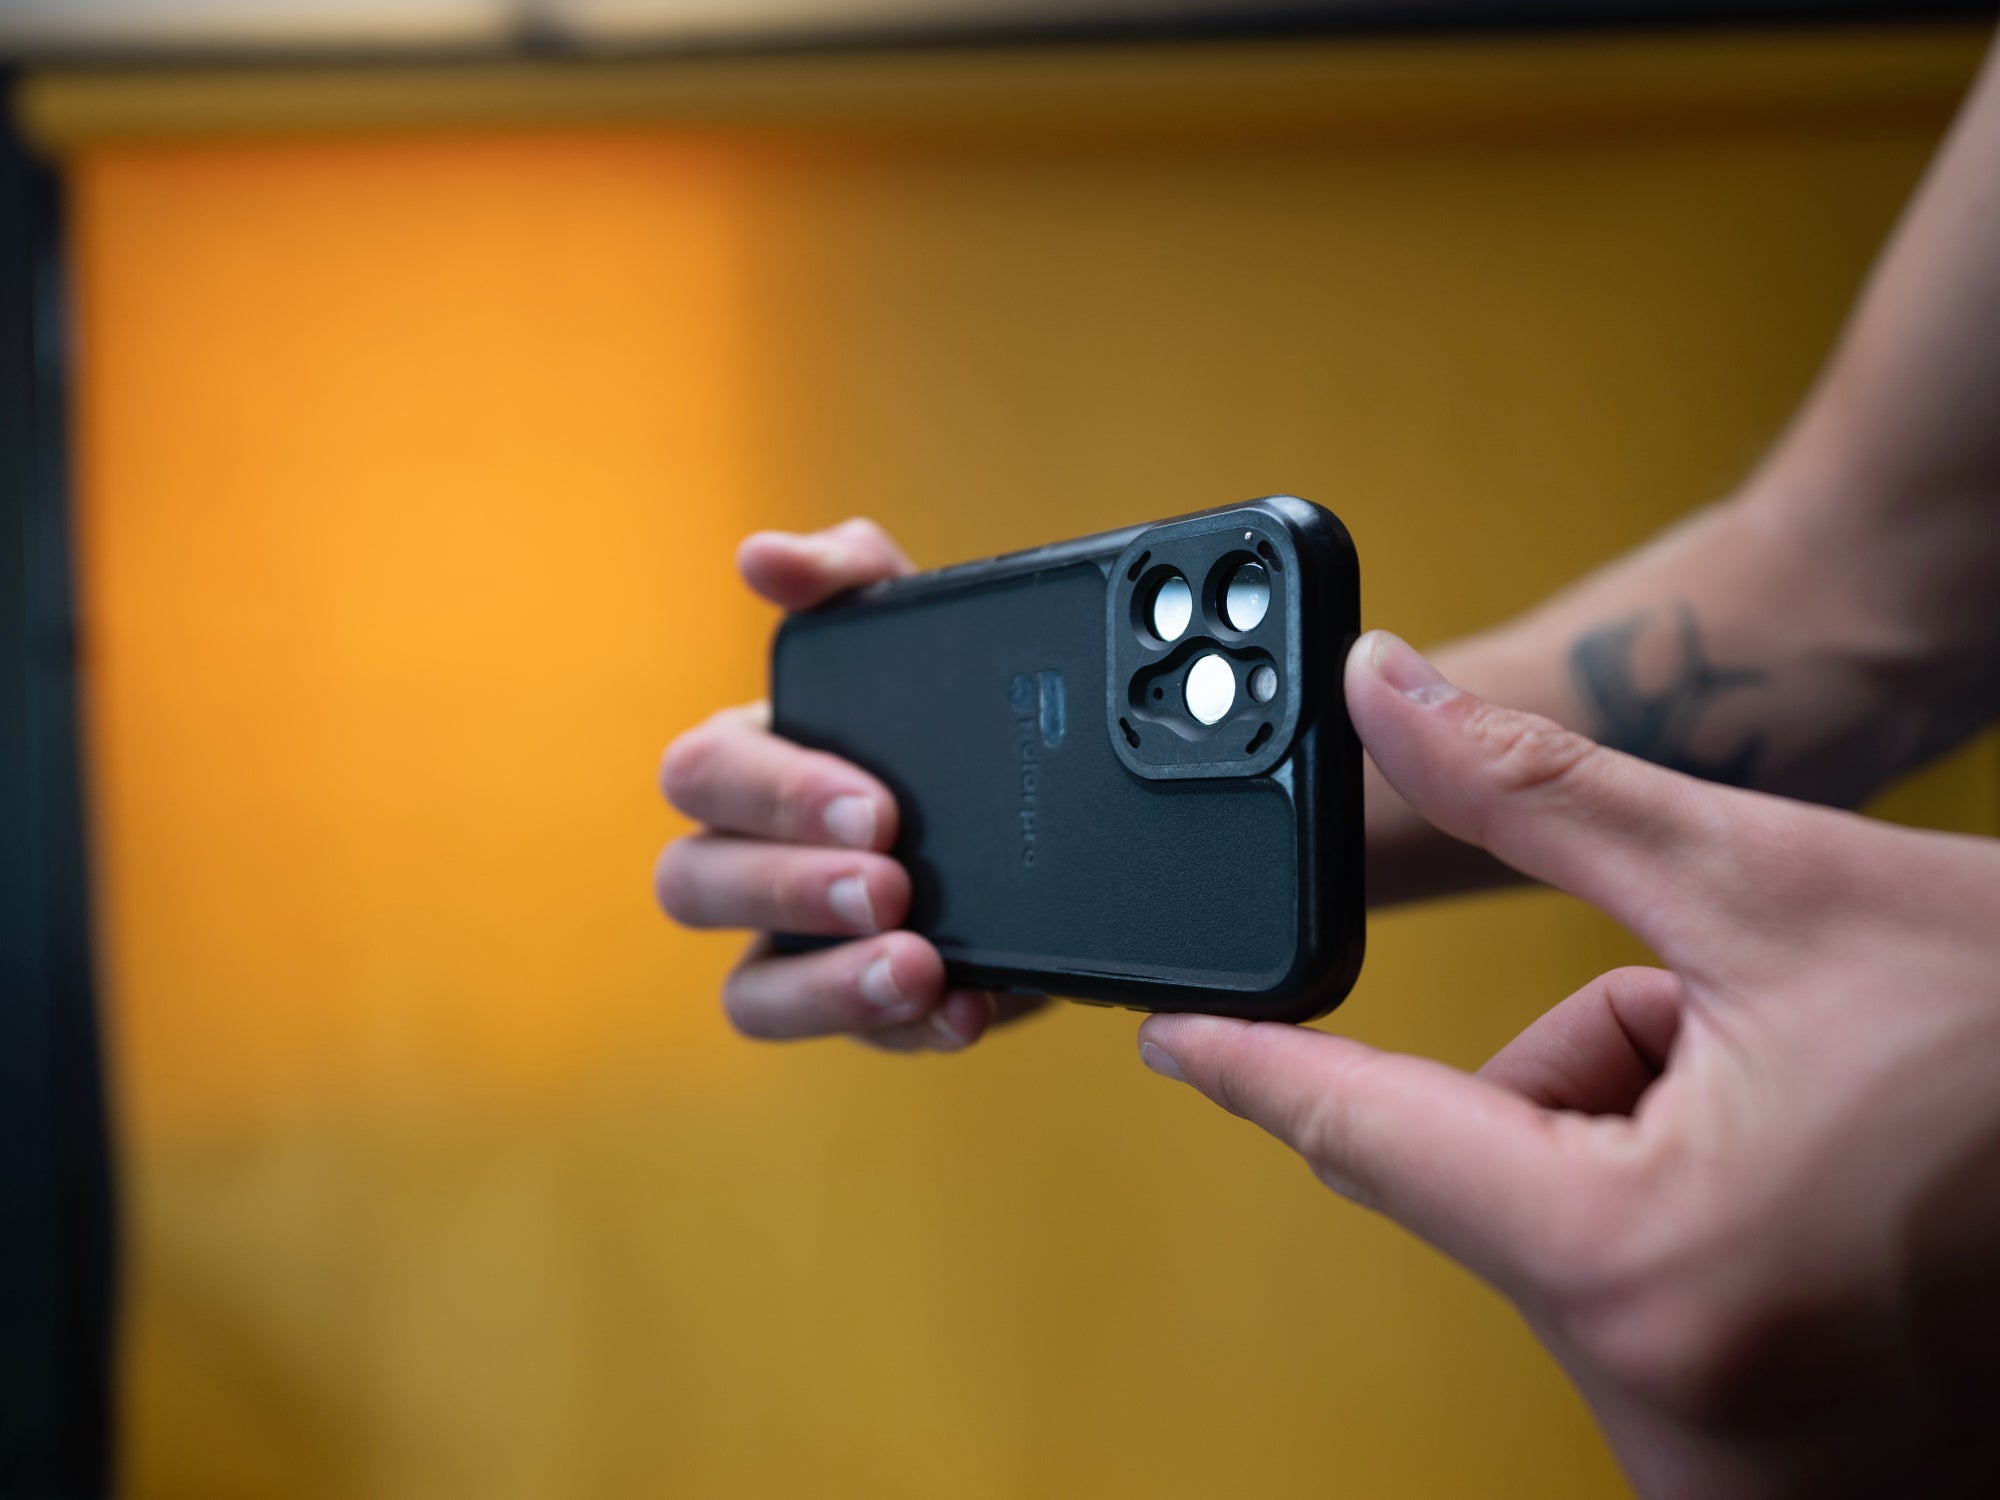 How to make a stop-motion movie with a smartphone